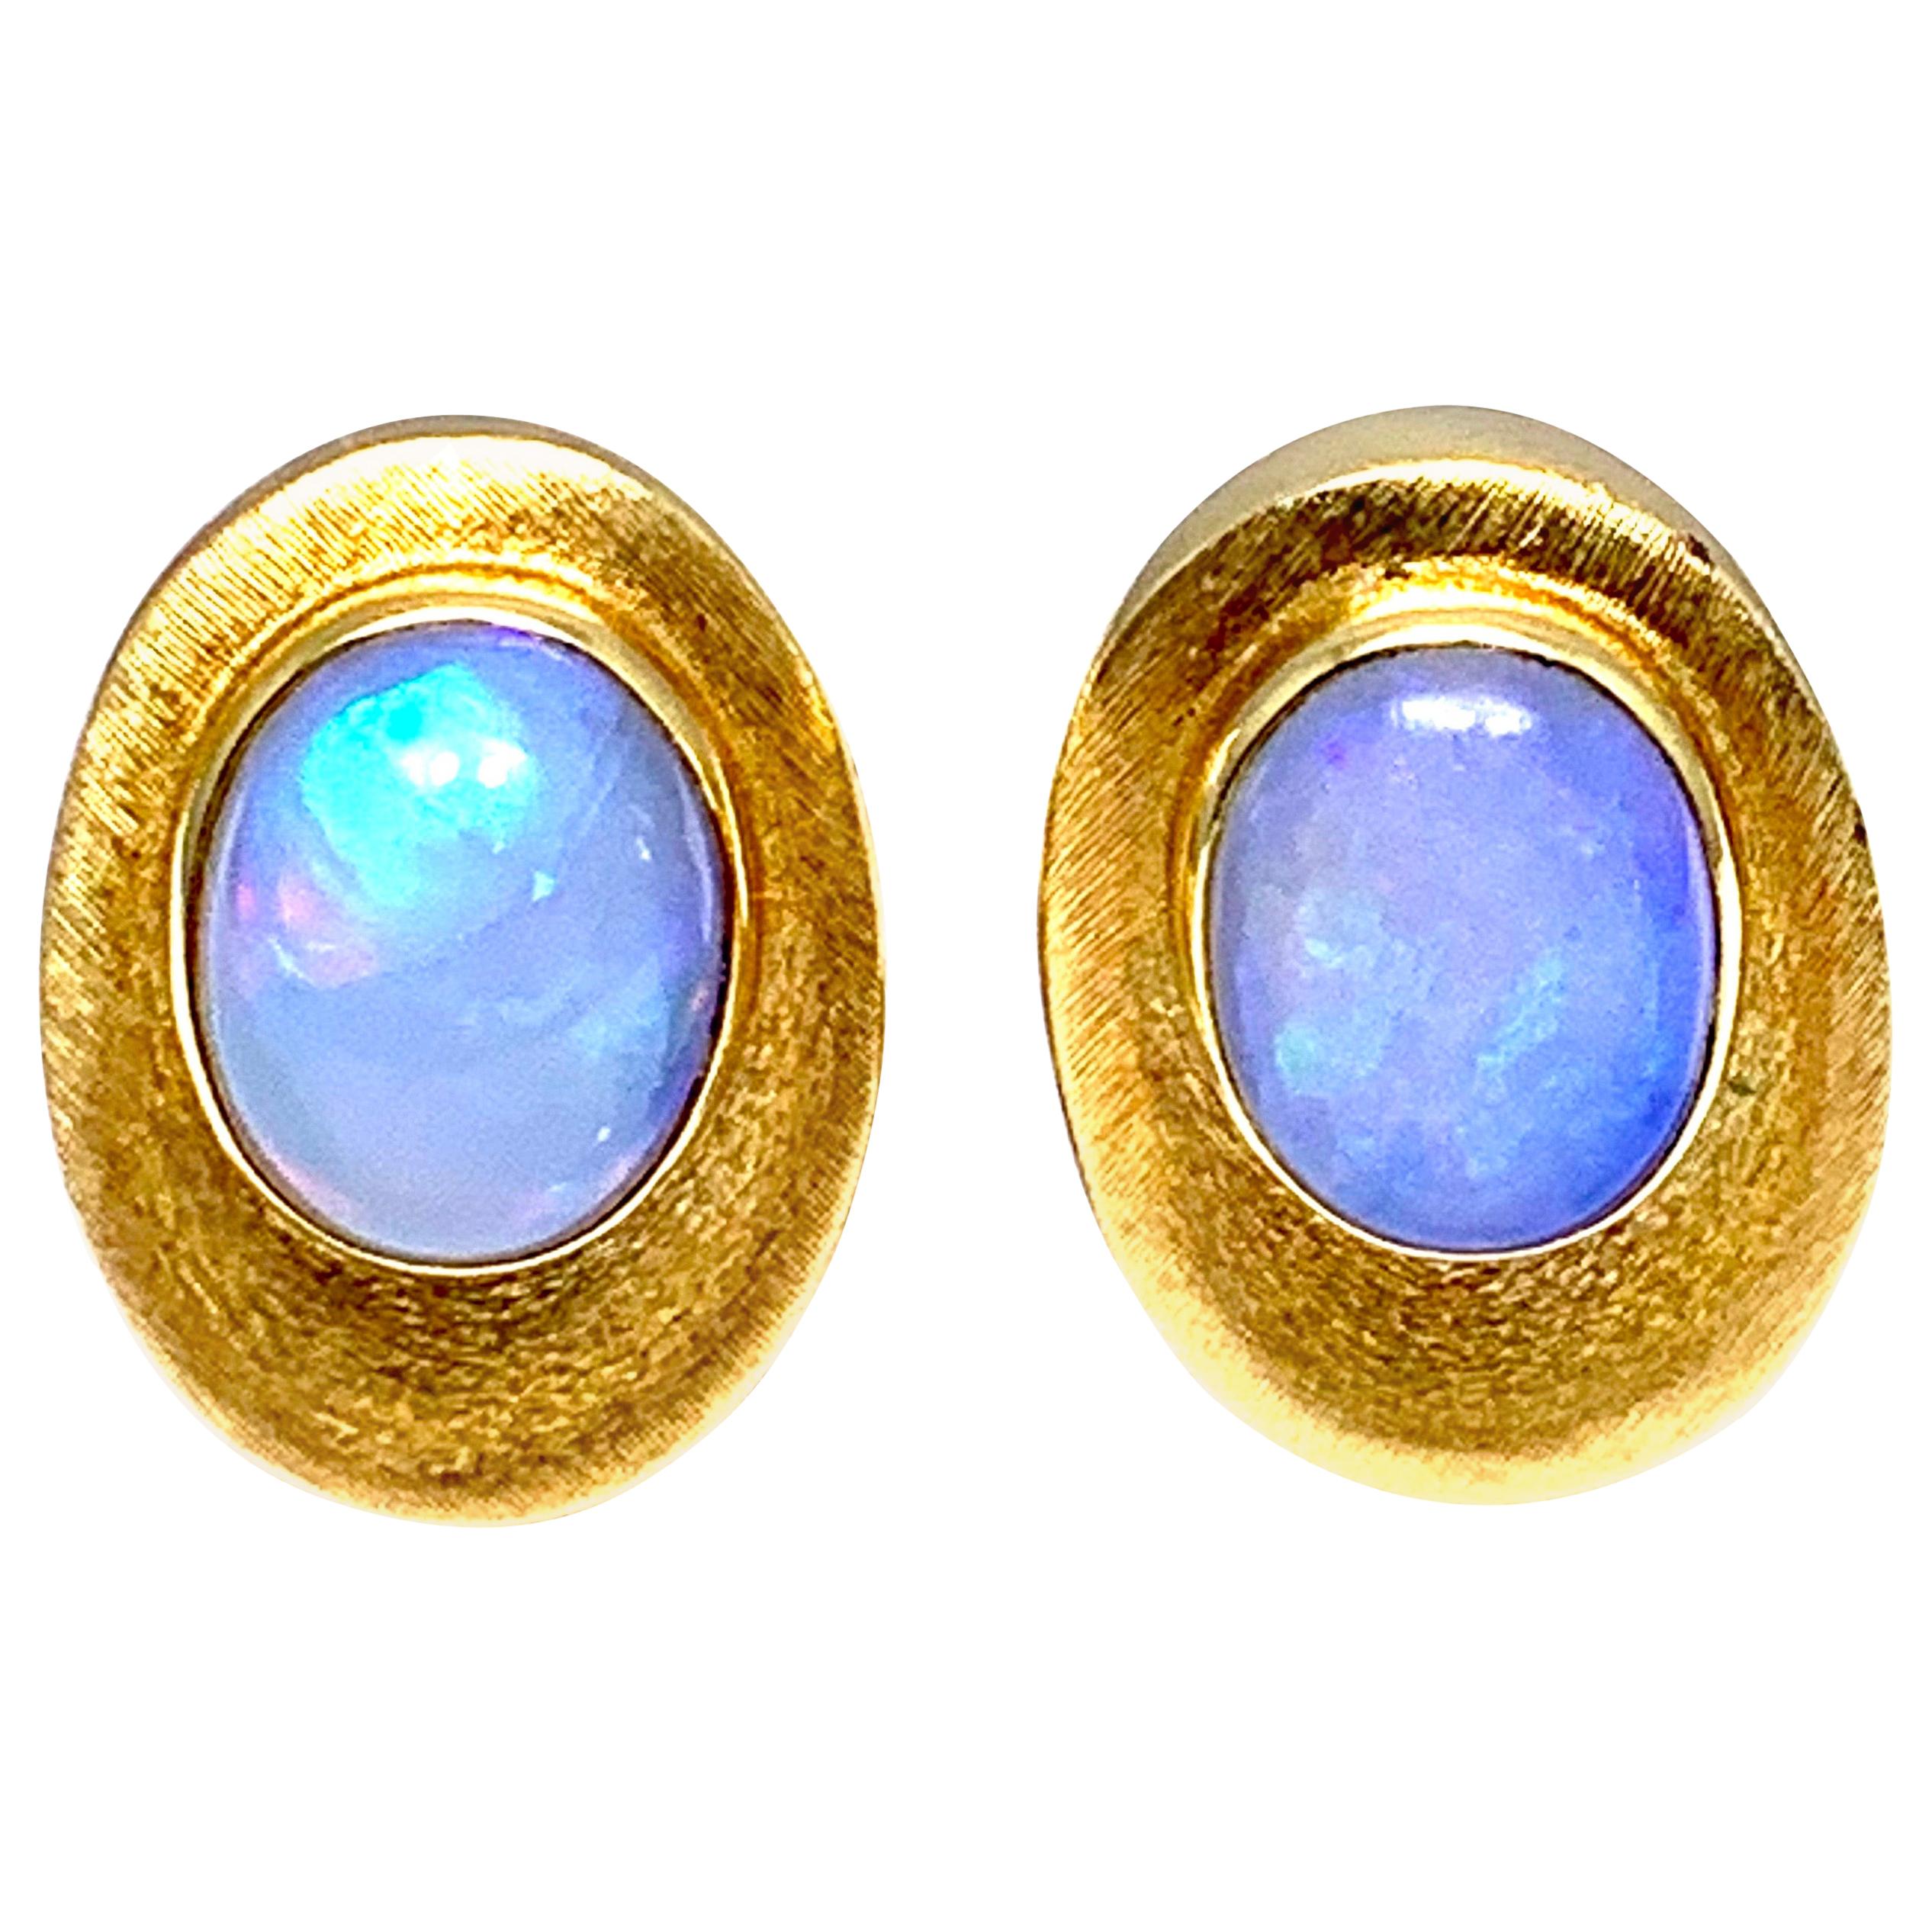 Bruno Guidi 3.65 Carat Oval Cabochon Opal and 18 Karat Yellow Gold Clip Earrings